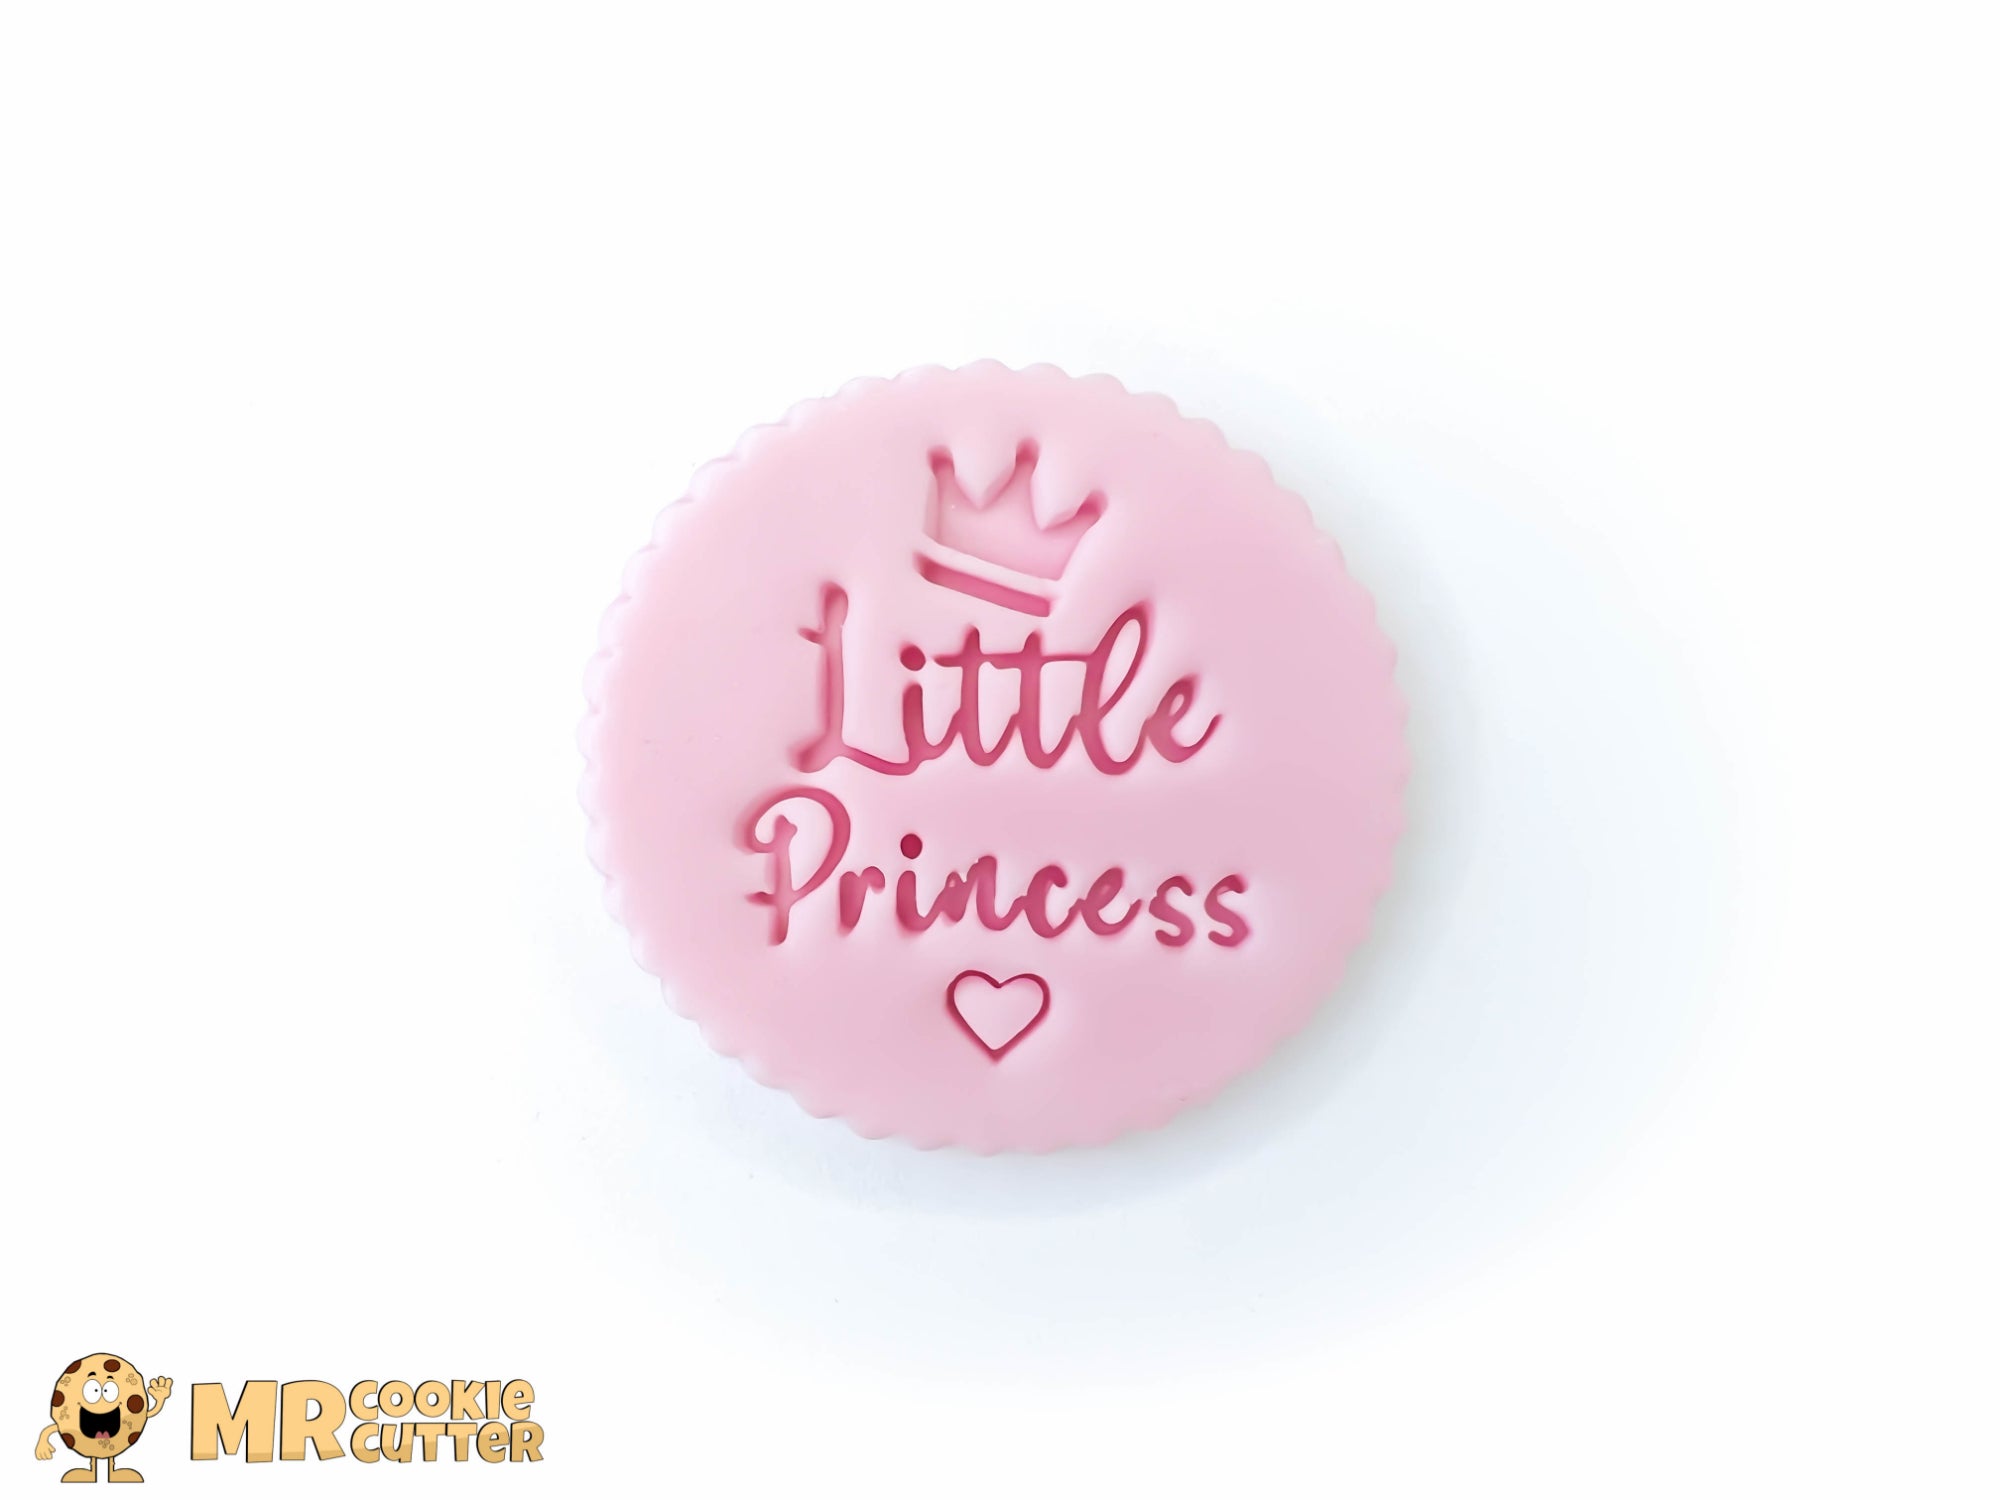 Little Princess Cupcake Topper with heart and crown